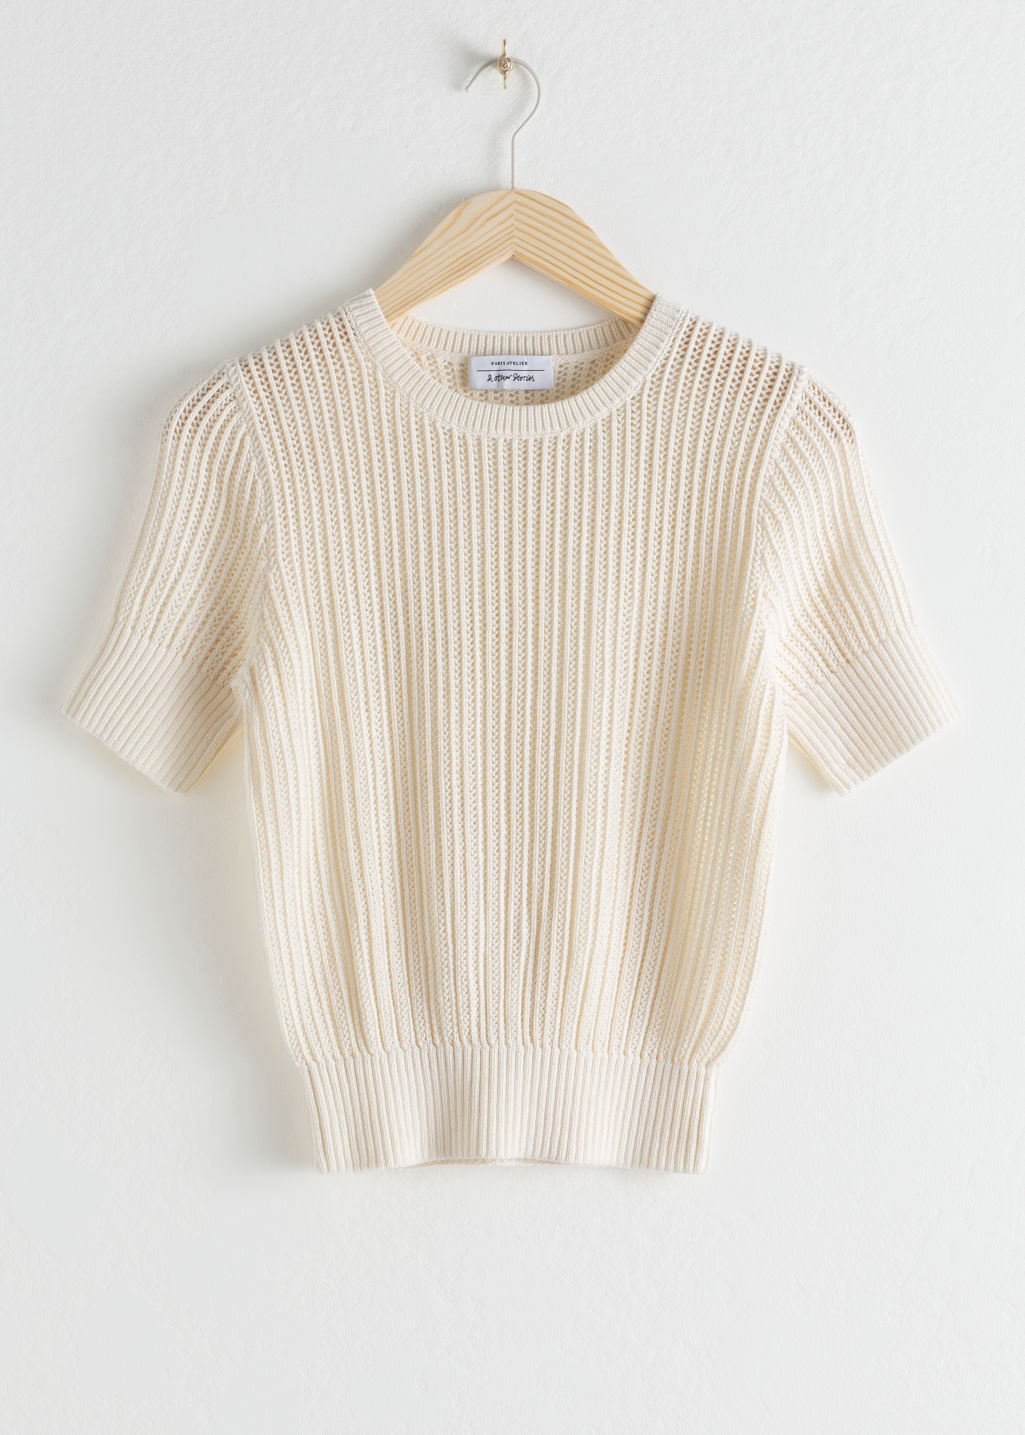 Open Crochet Knit Top - White - Tops & T-shirts - & Other Stories